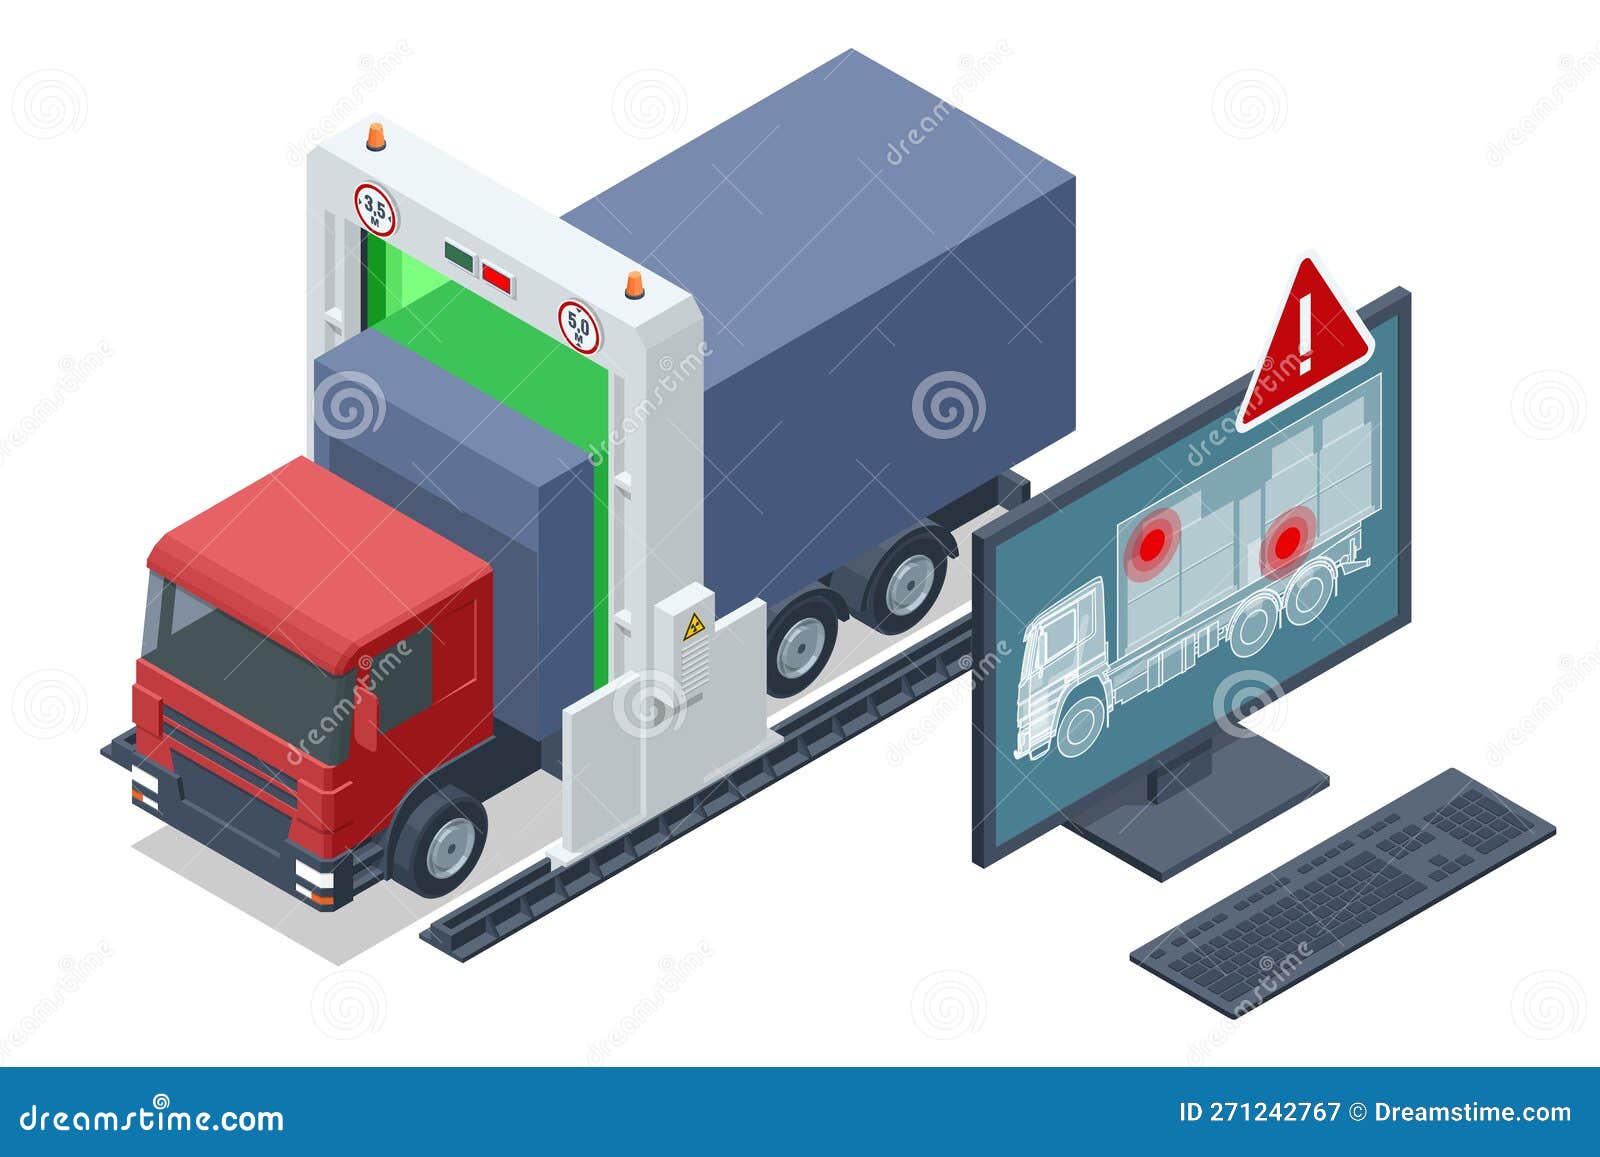 isometric x-ray truck scanner. mobile x-ray scanning system is used against smuggling. customs control on border